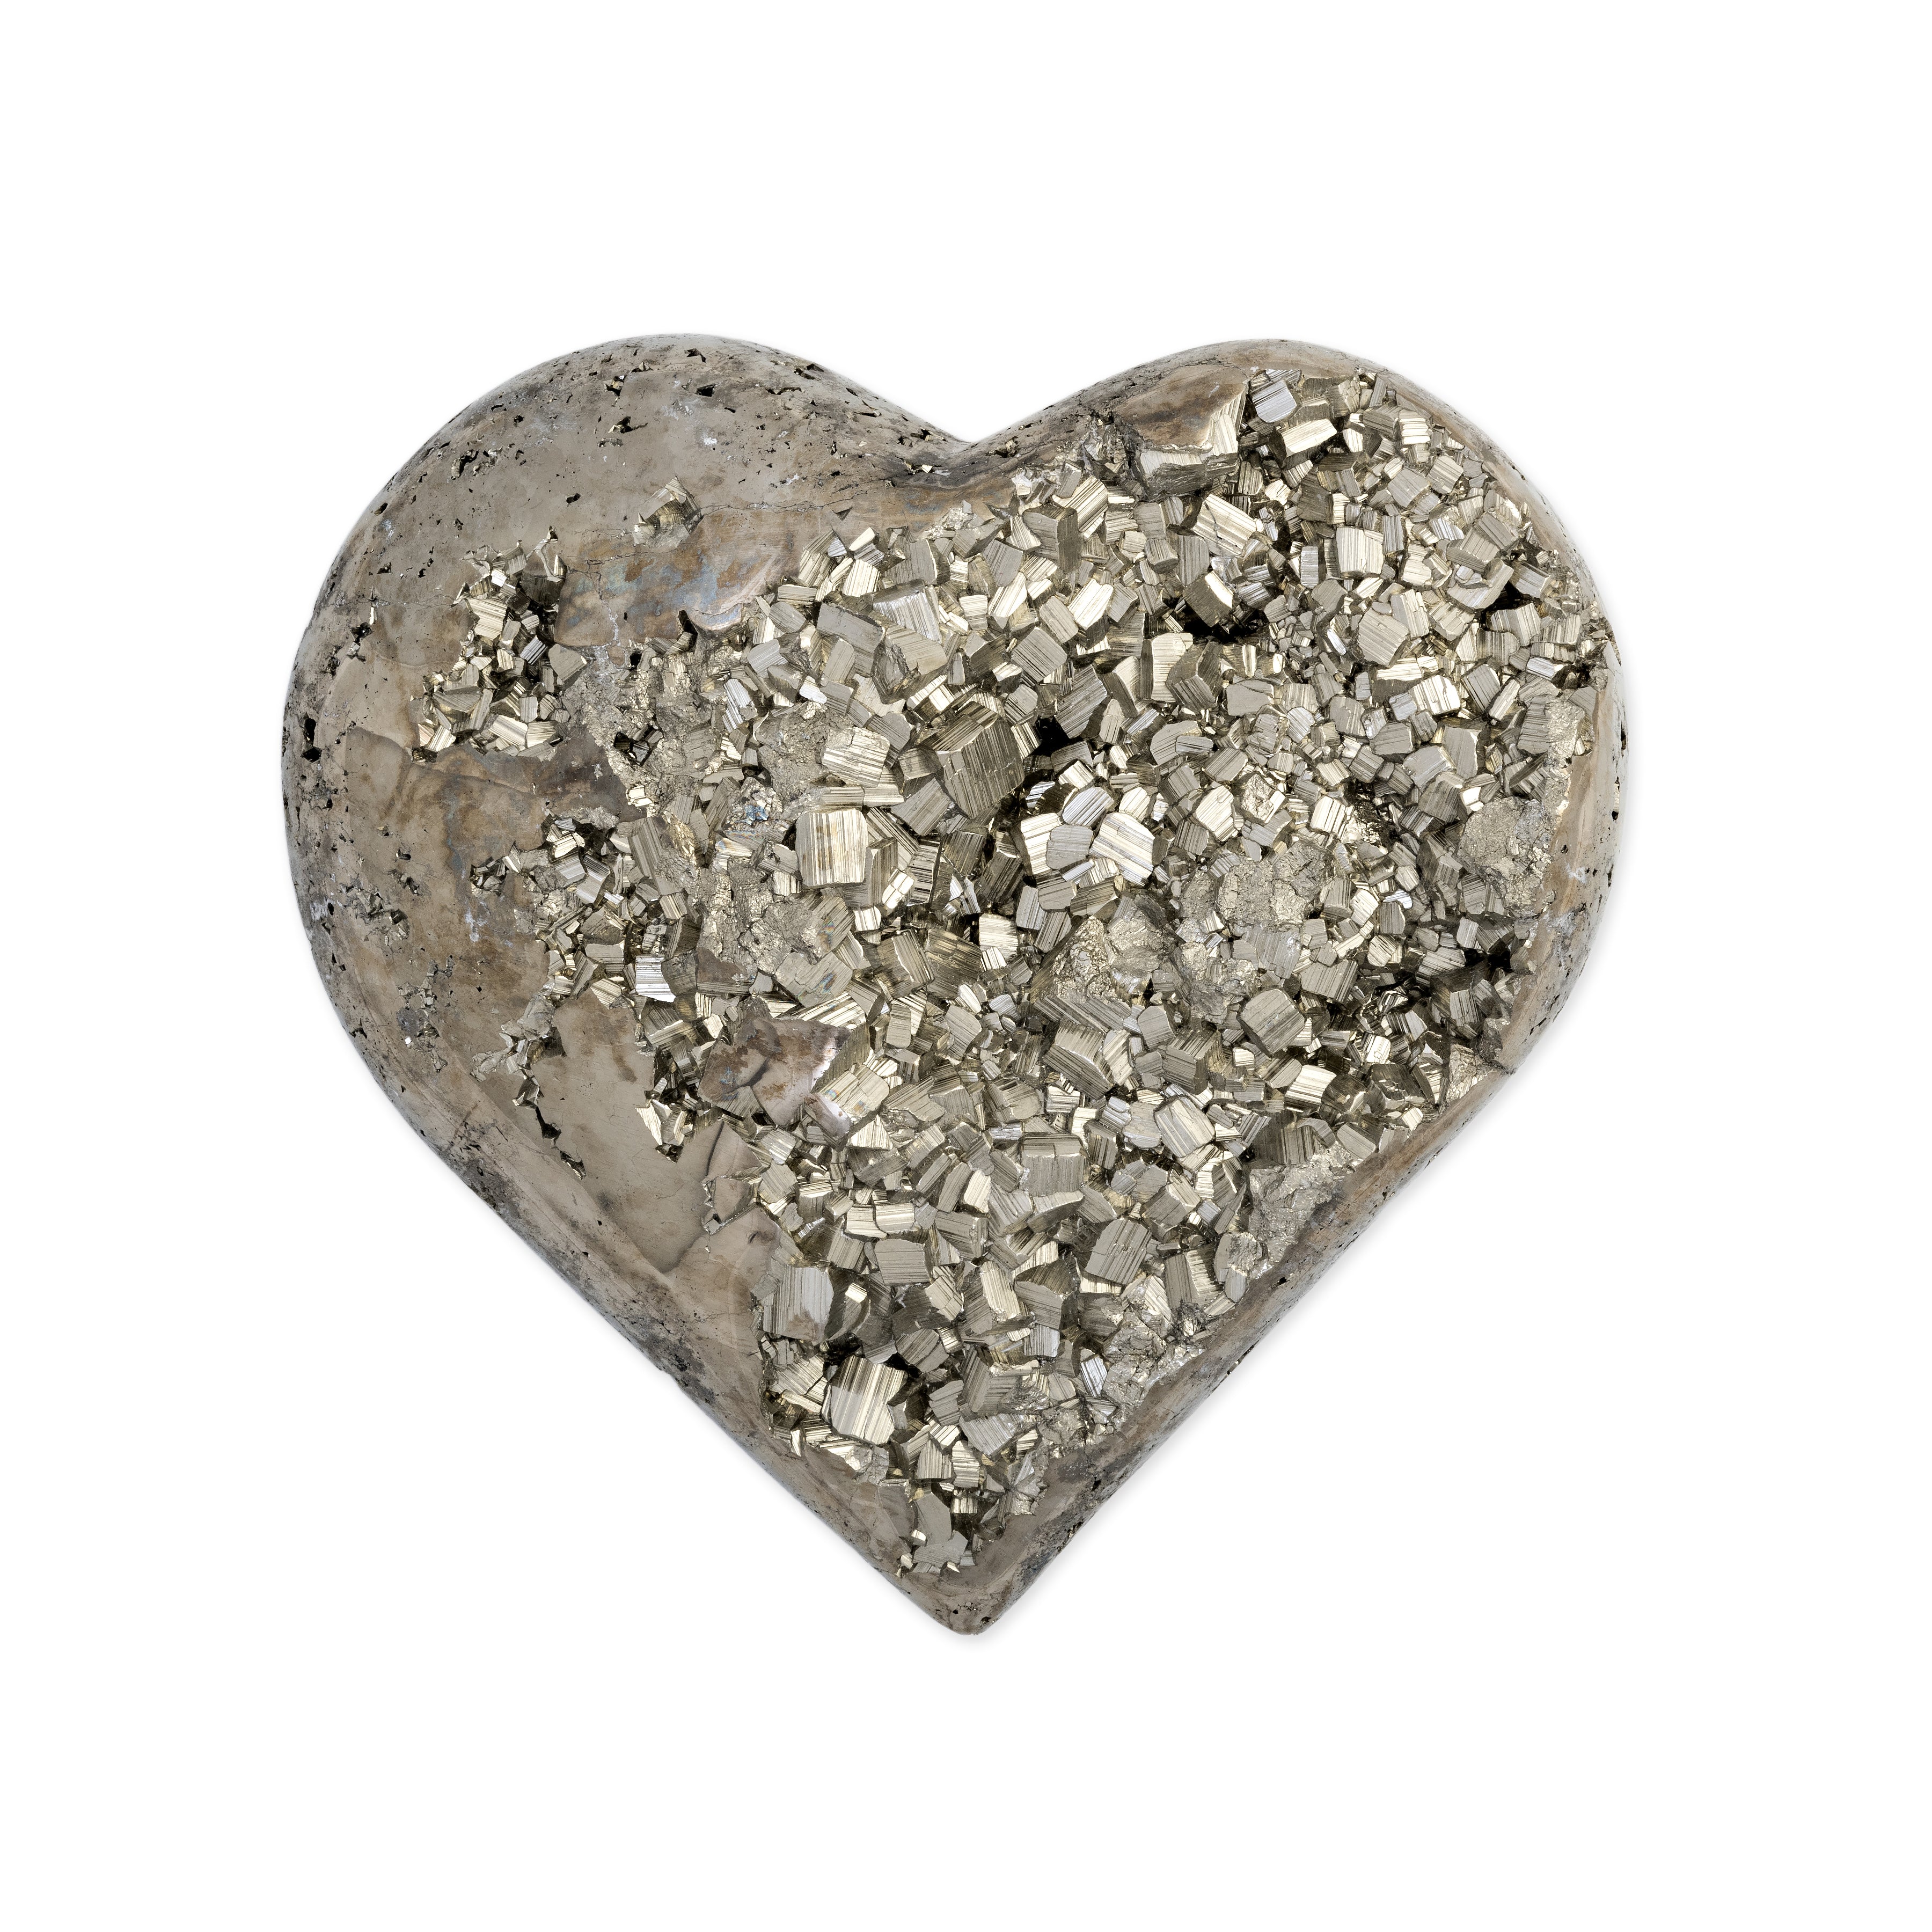 LARGE PYRITE CLUSTER HEART